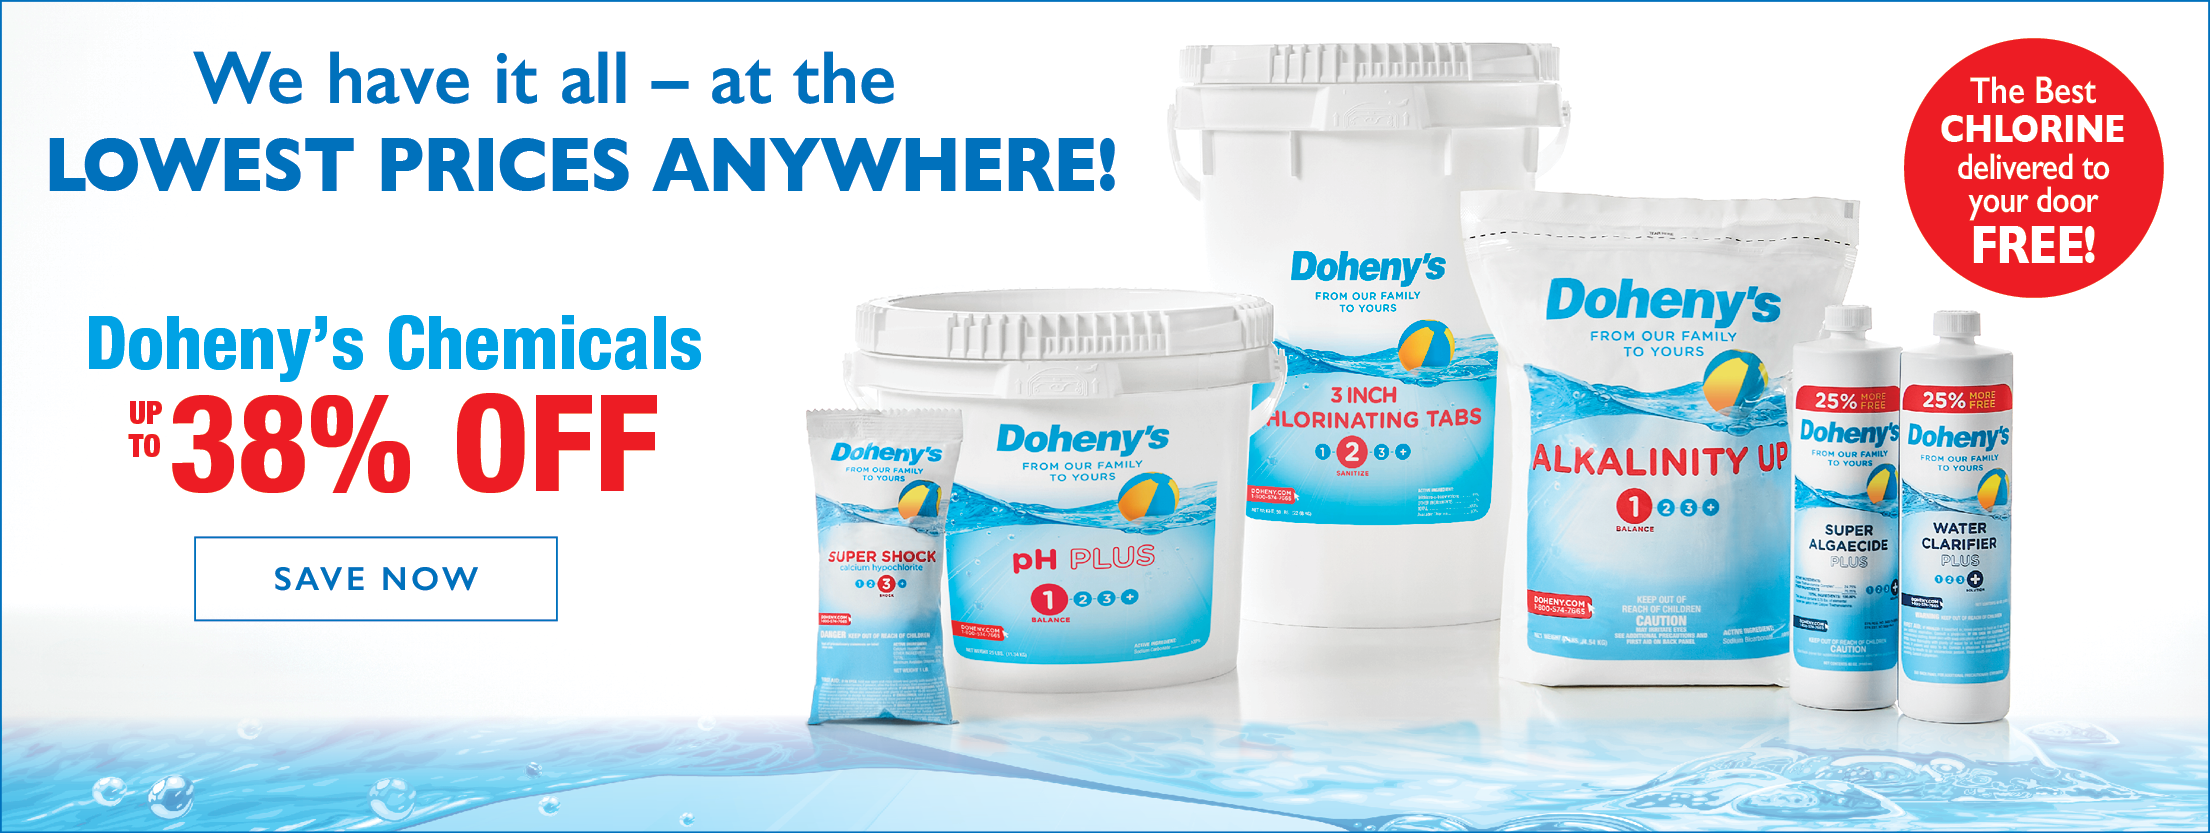 Doheny's Chemicals up to 38% OFF